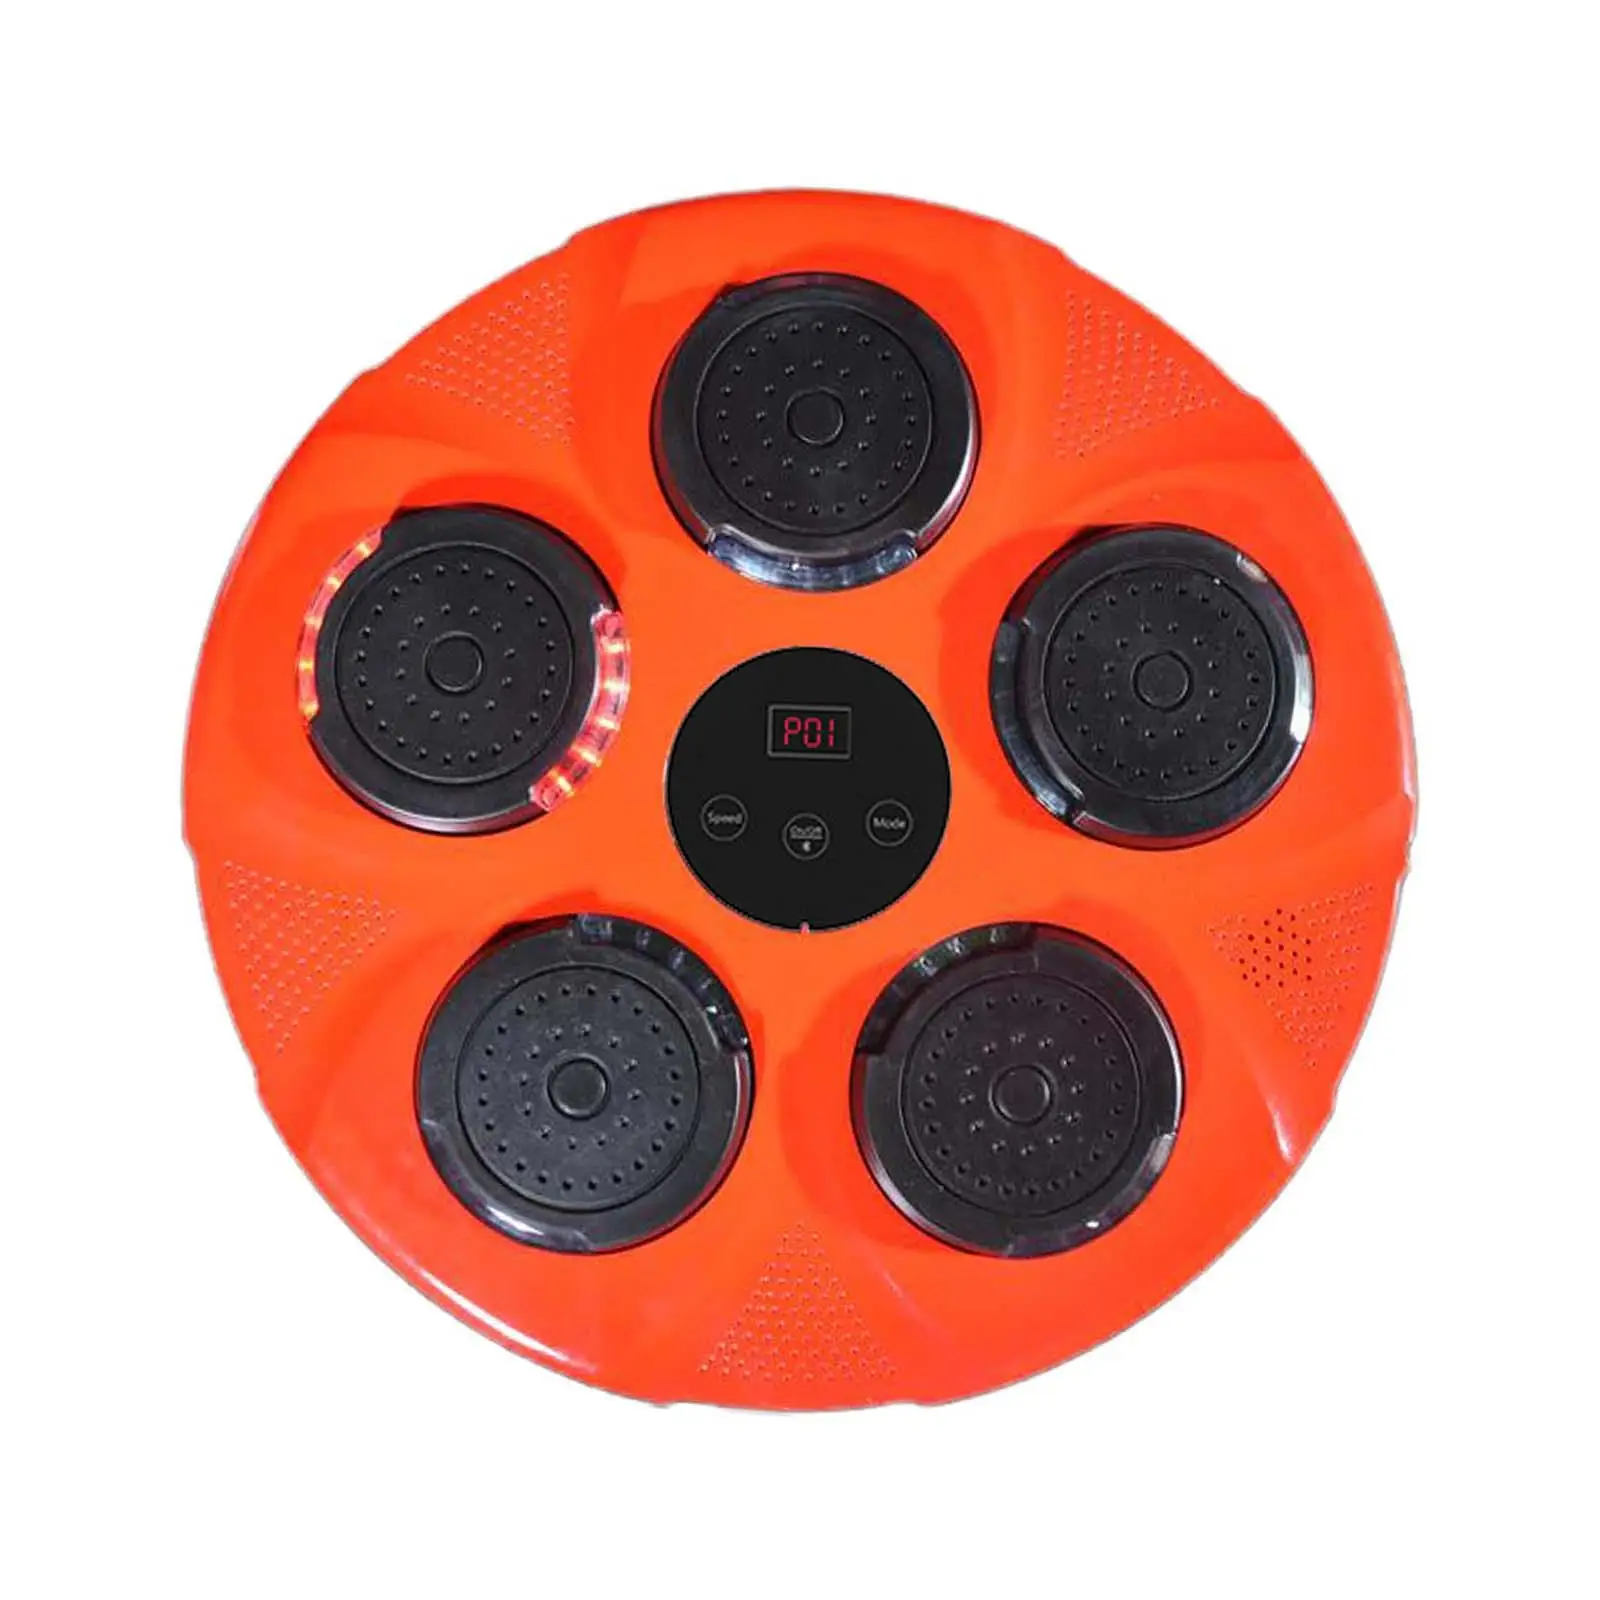 Boxing Machine Training Relaxing Rhythm Wall Target Rechargeable Punching Pad Boxing Trainer for Home Gym Practice Exercise